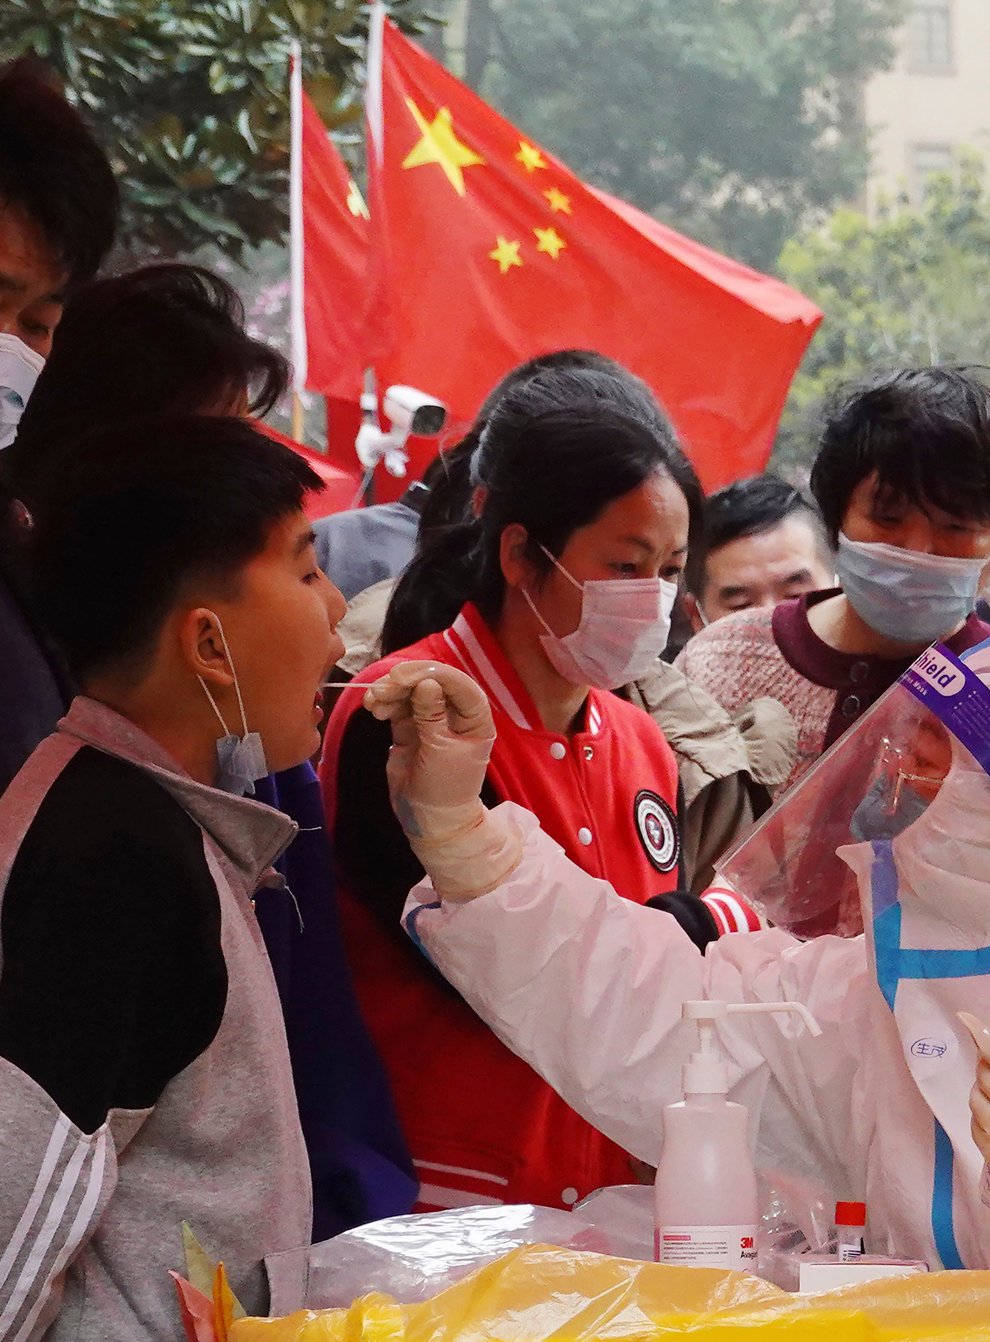 A medical worker takes a swab sample from a child for Covid-19 testing in a community in Changzhou in eastern China’s Jiangsu province (Chinatopix via AP)